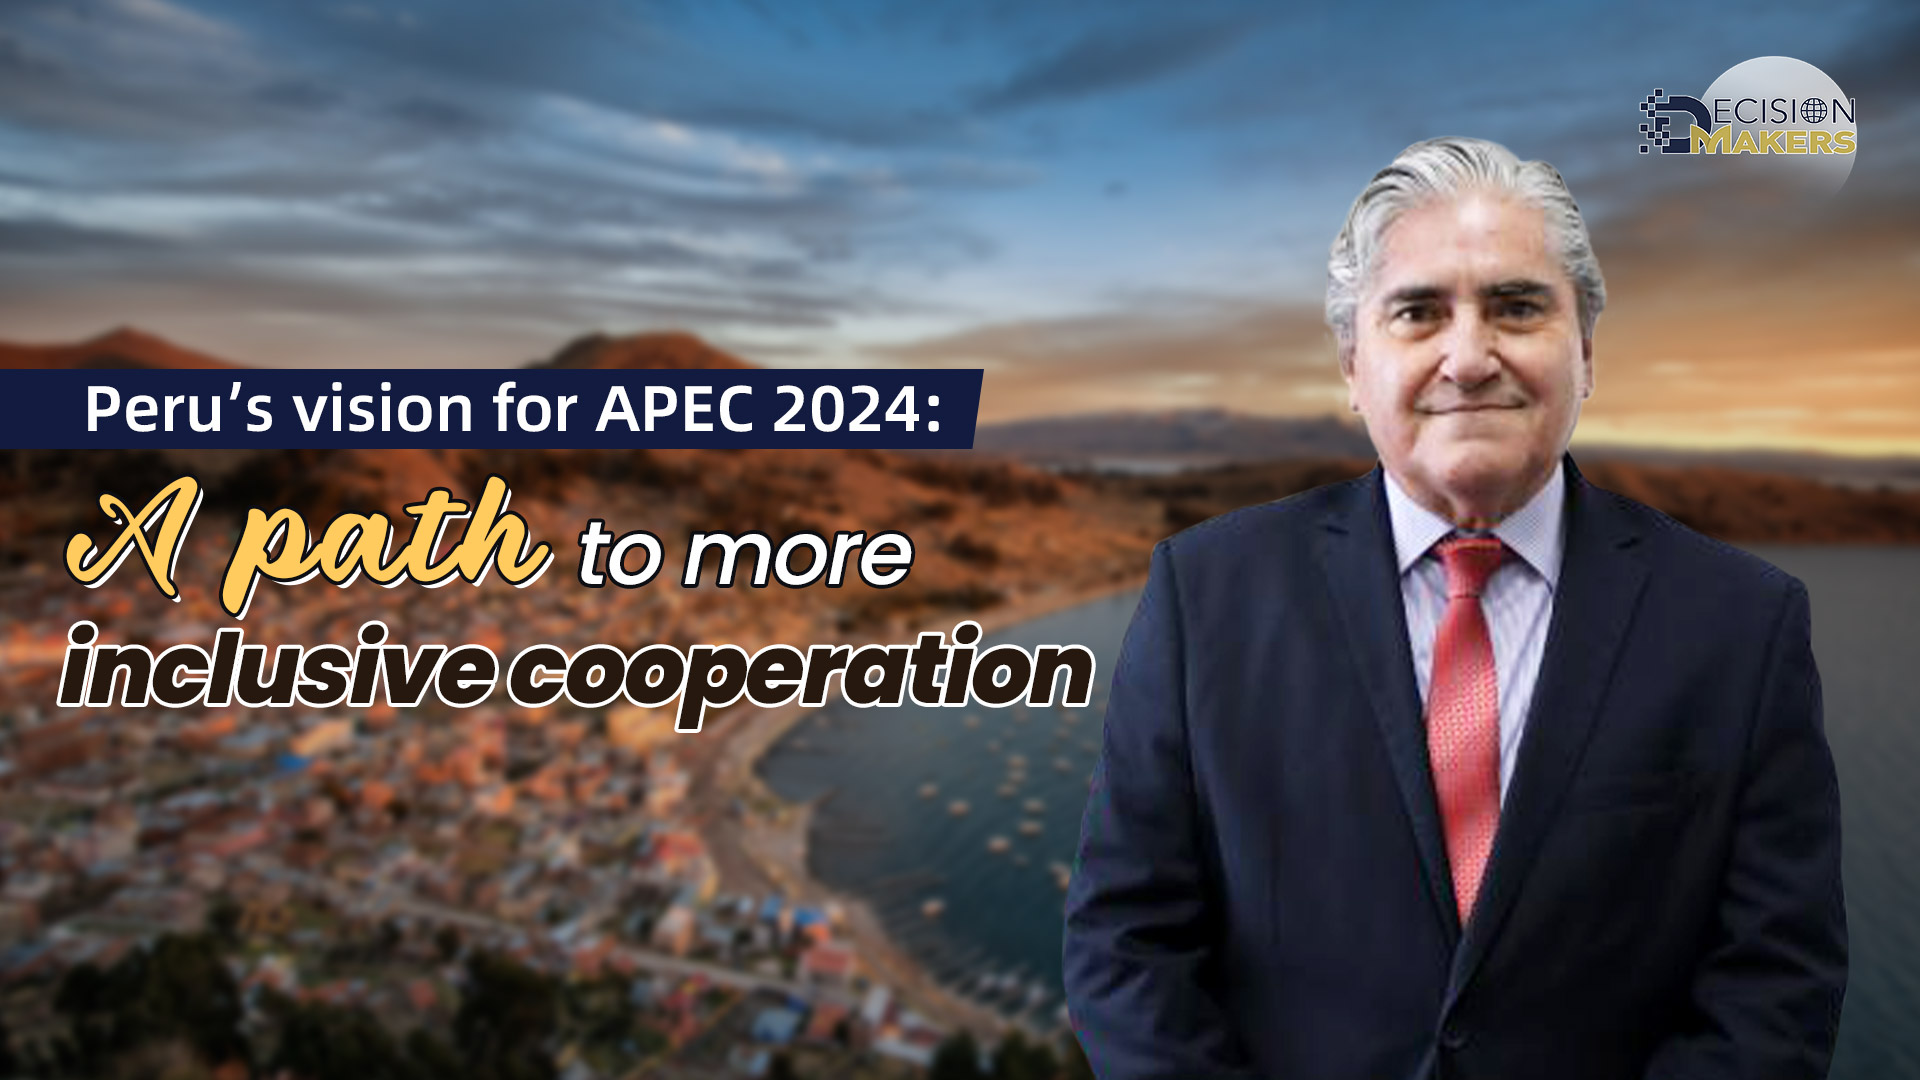 Peru's vision for APEC 2024: A path to more inclusive cooperation